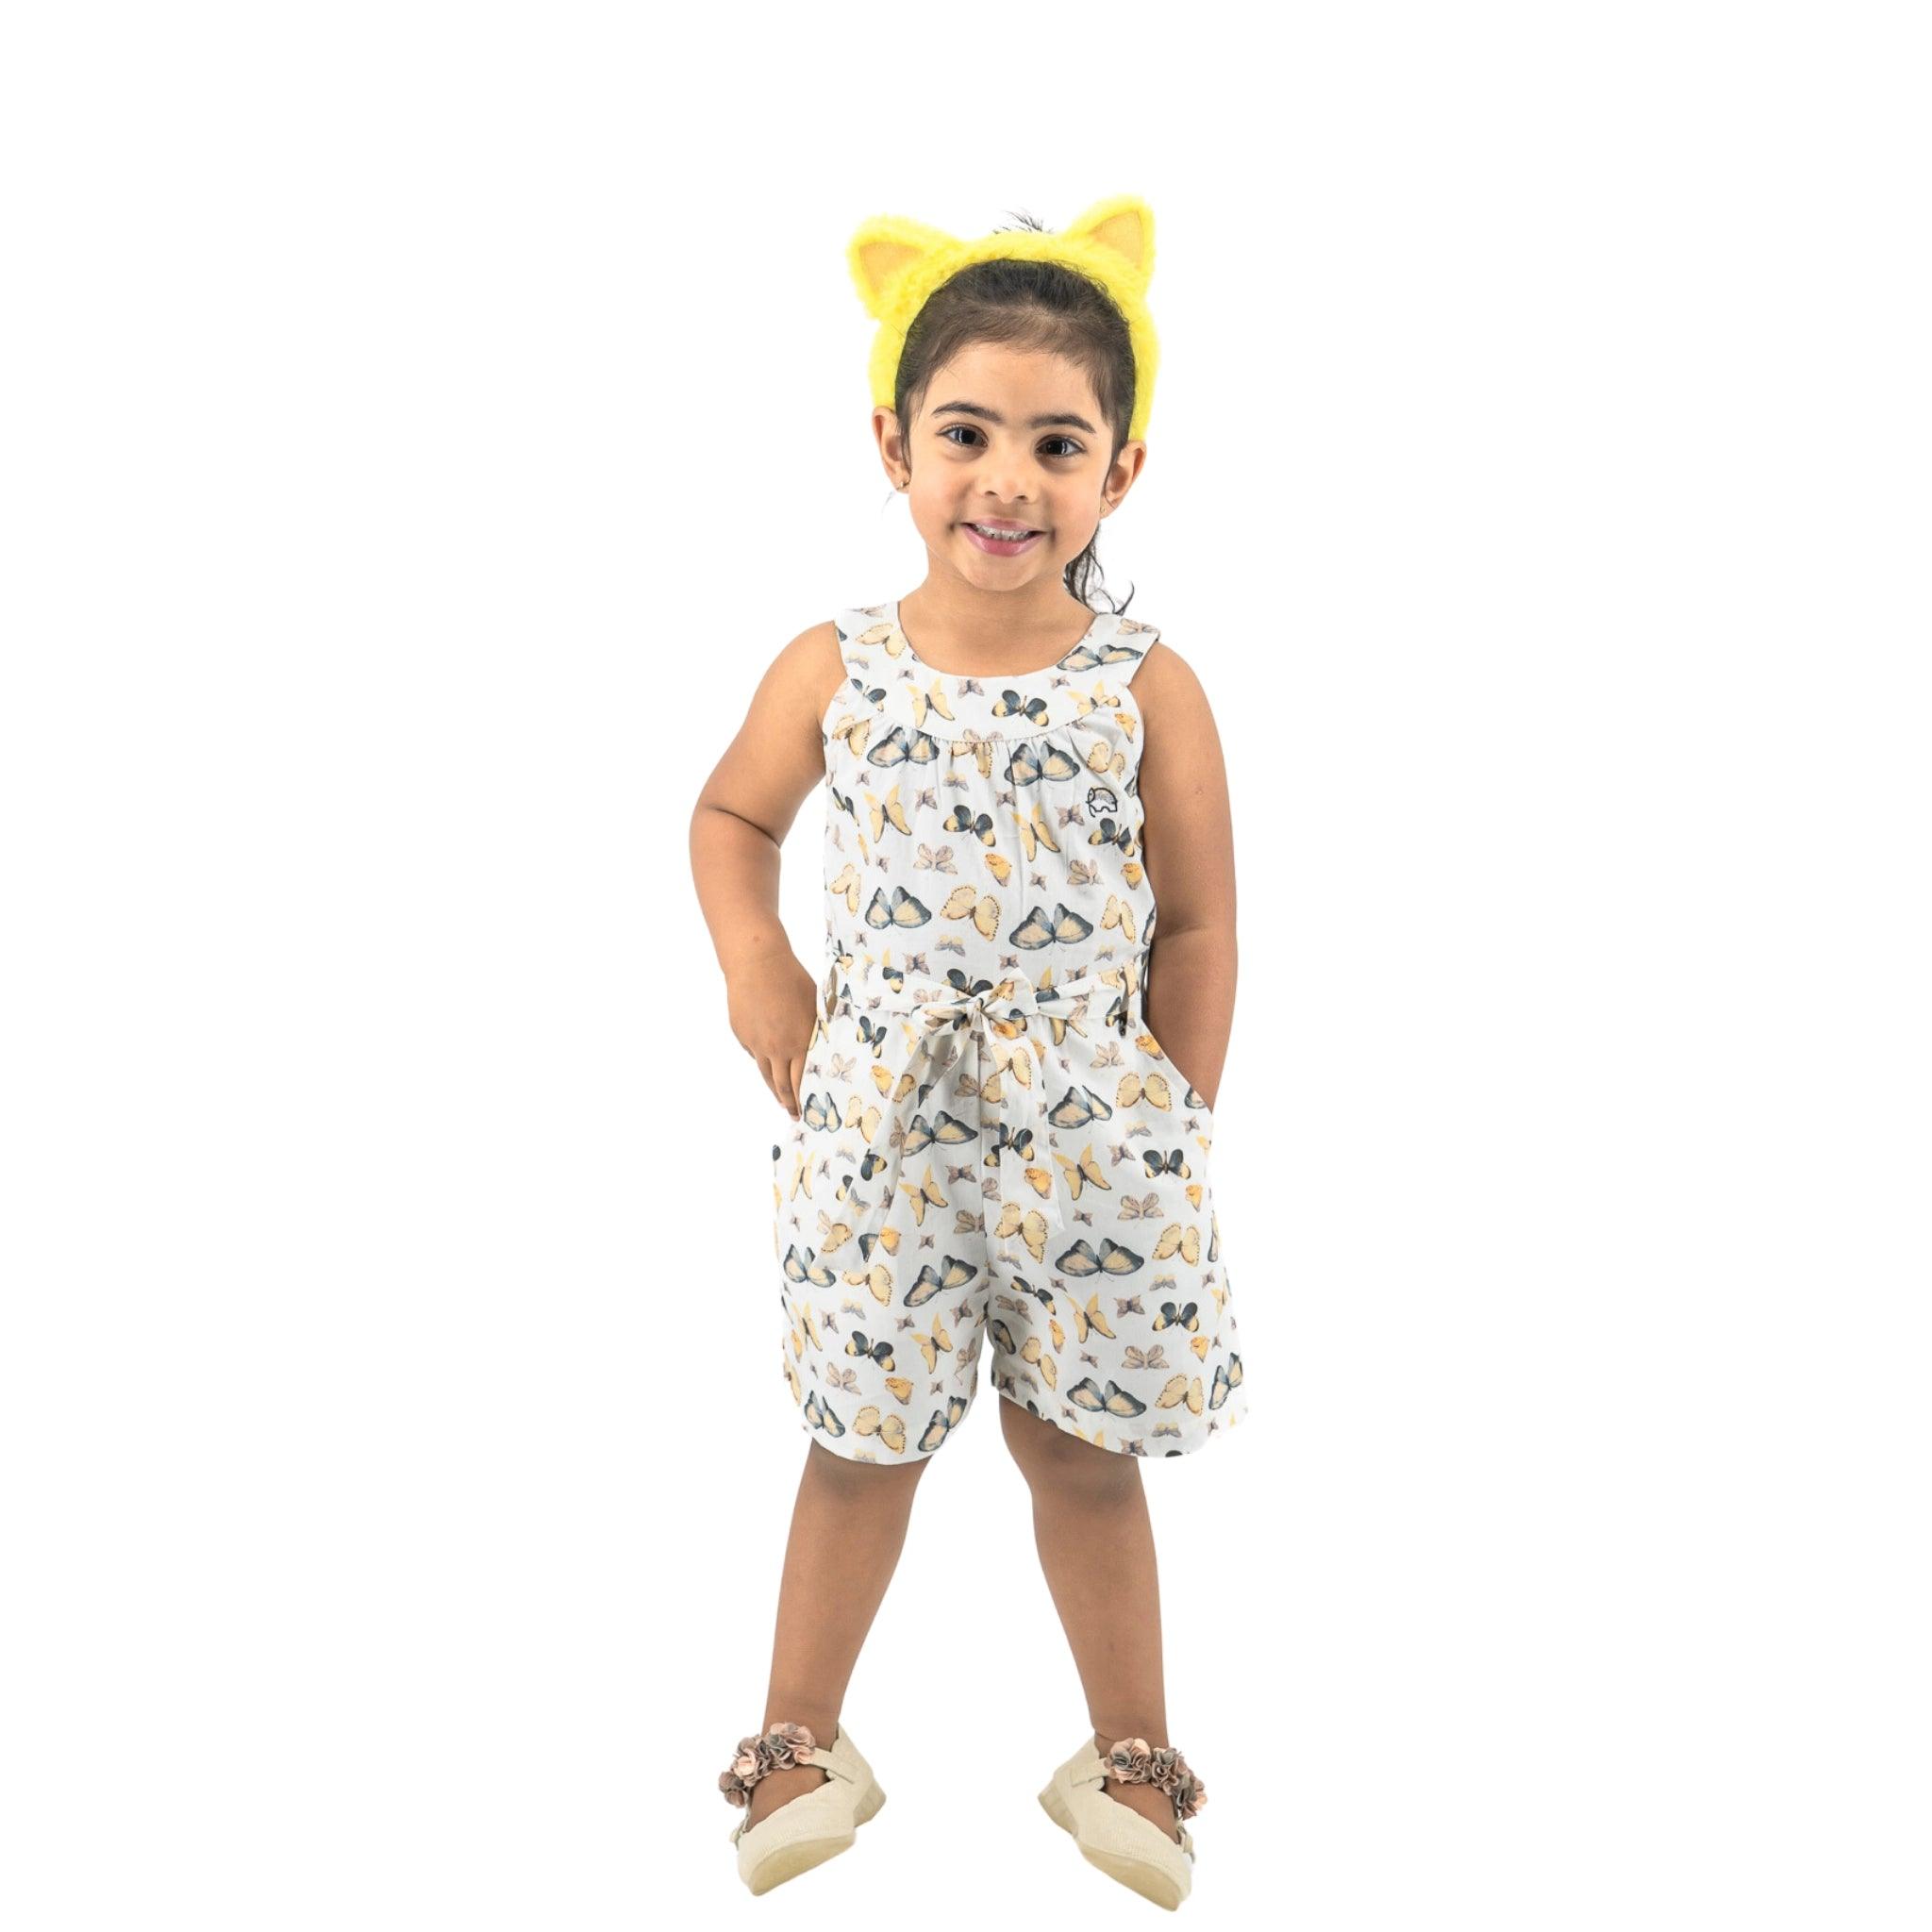 Young girl in a Karee White Adventure-Ready Cotton Play Suit and yellow hairband standing and smiling against a white background.